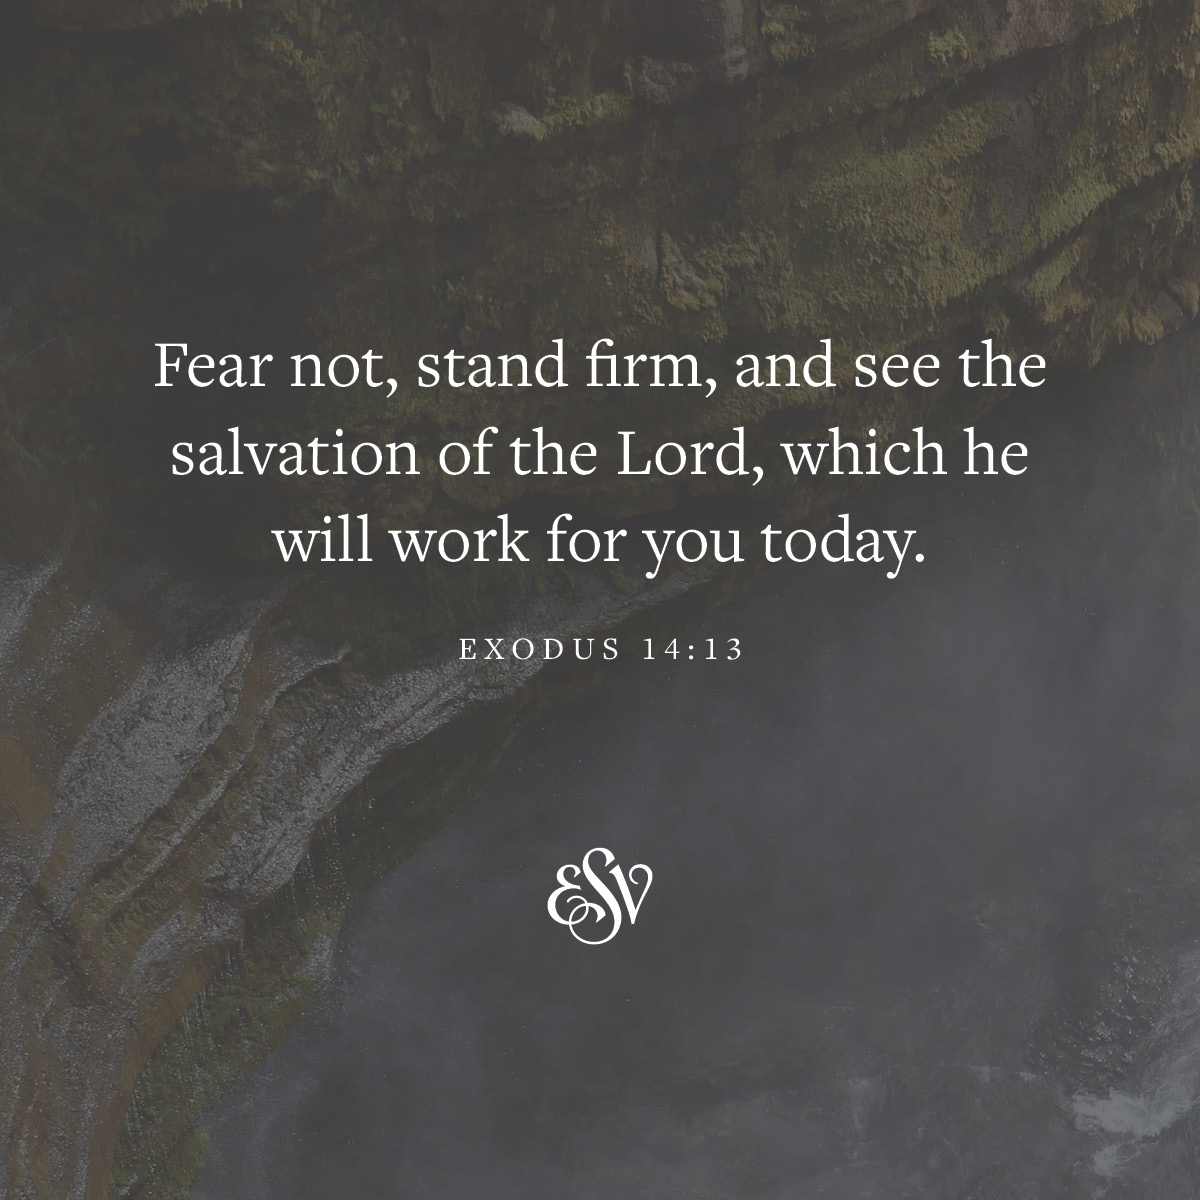 Fear not, stand firm, and see the salvation of the Lord, which he will work for you today. 
—Exodus 14:15 ESV.org 

#Verseoftheday #ESV #Scripturememoryverse #Bible